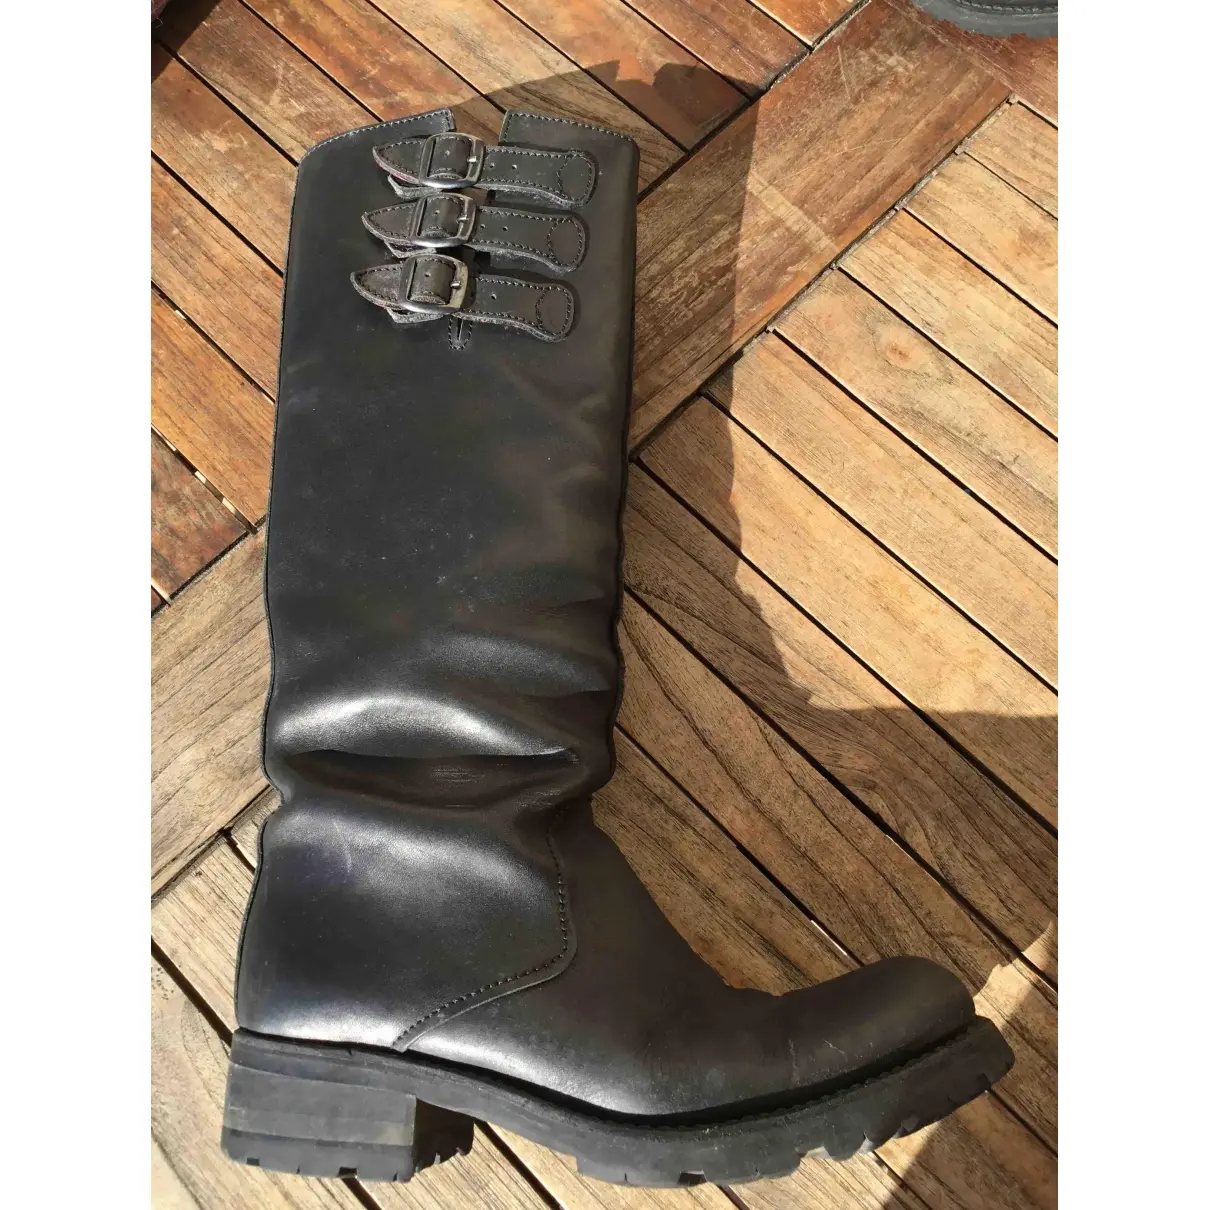 Buy Free Lance Geronimo leather biker boots online